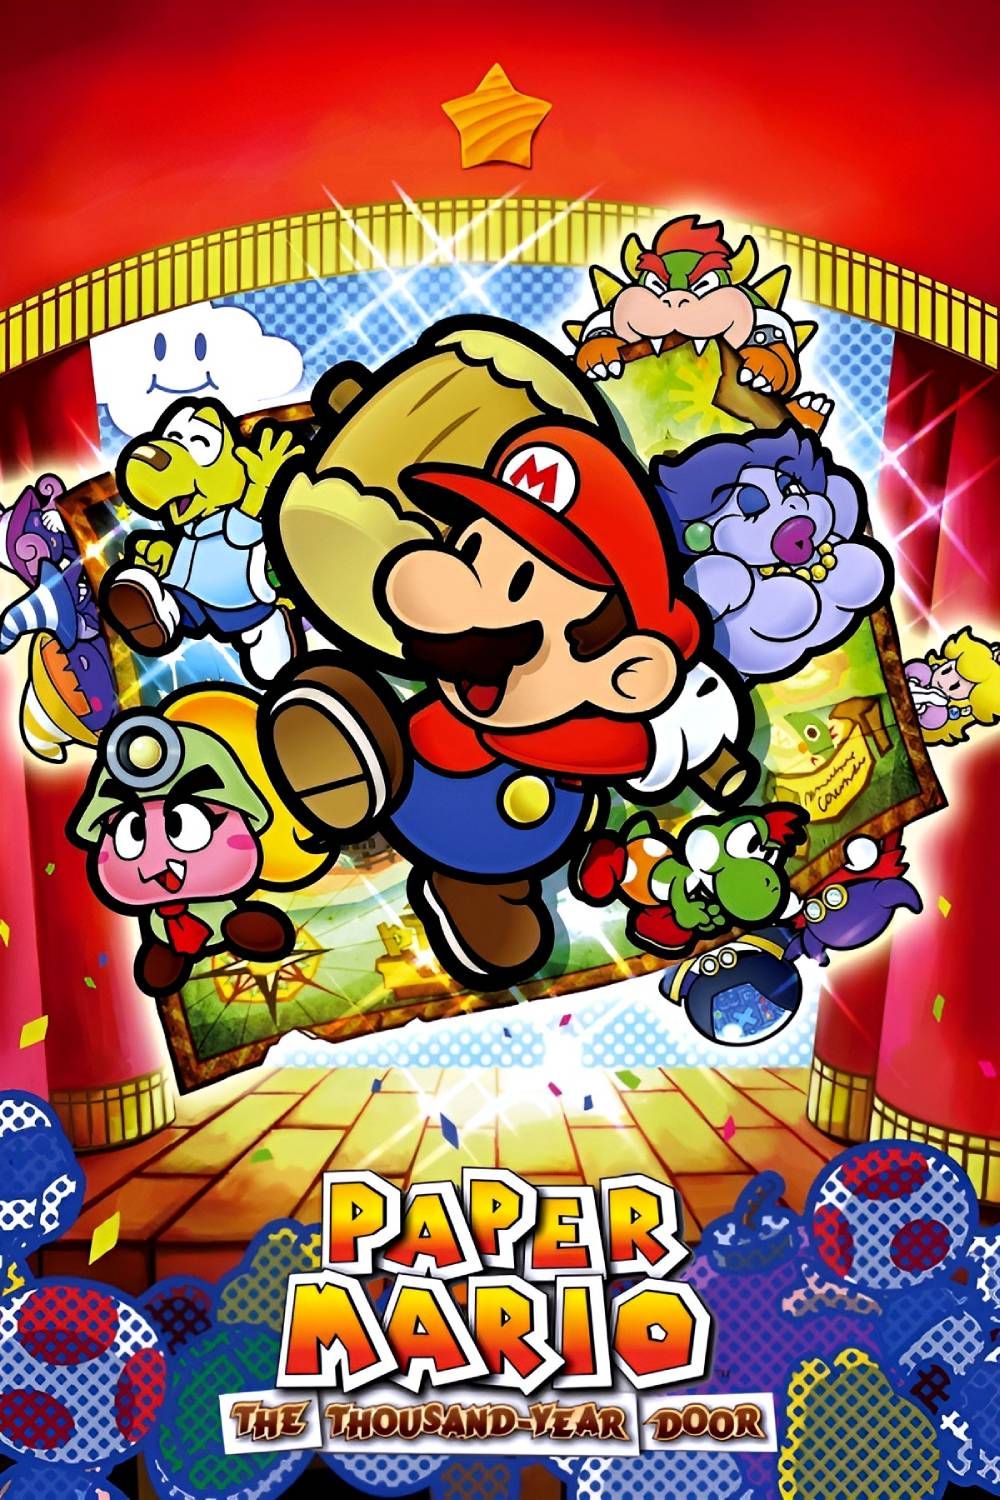 Paper Mario TTYD's PostGame Content Brings a Series Myth Full Circle